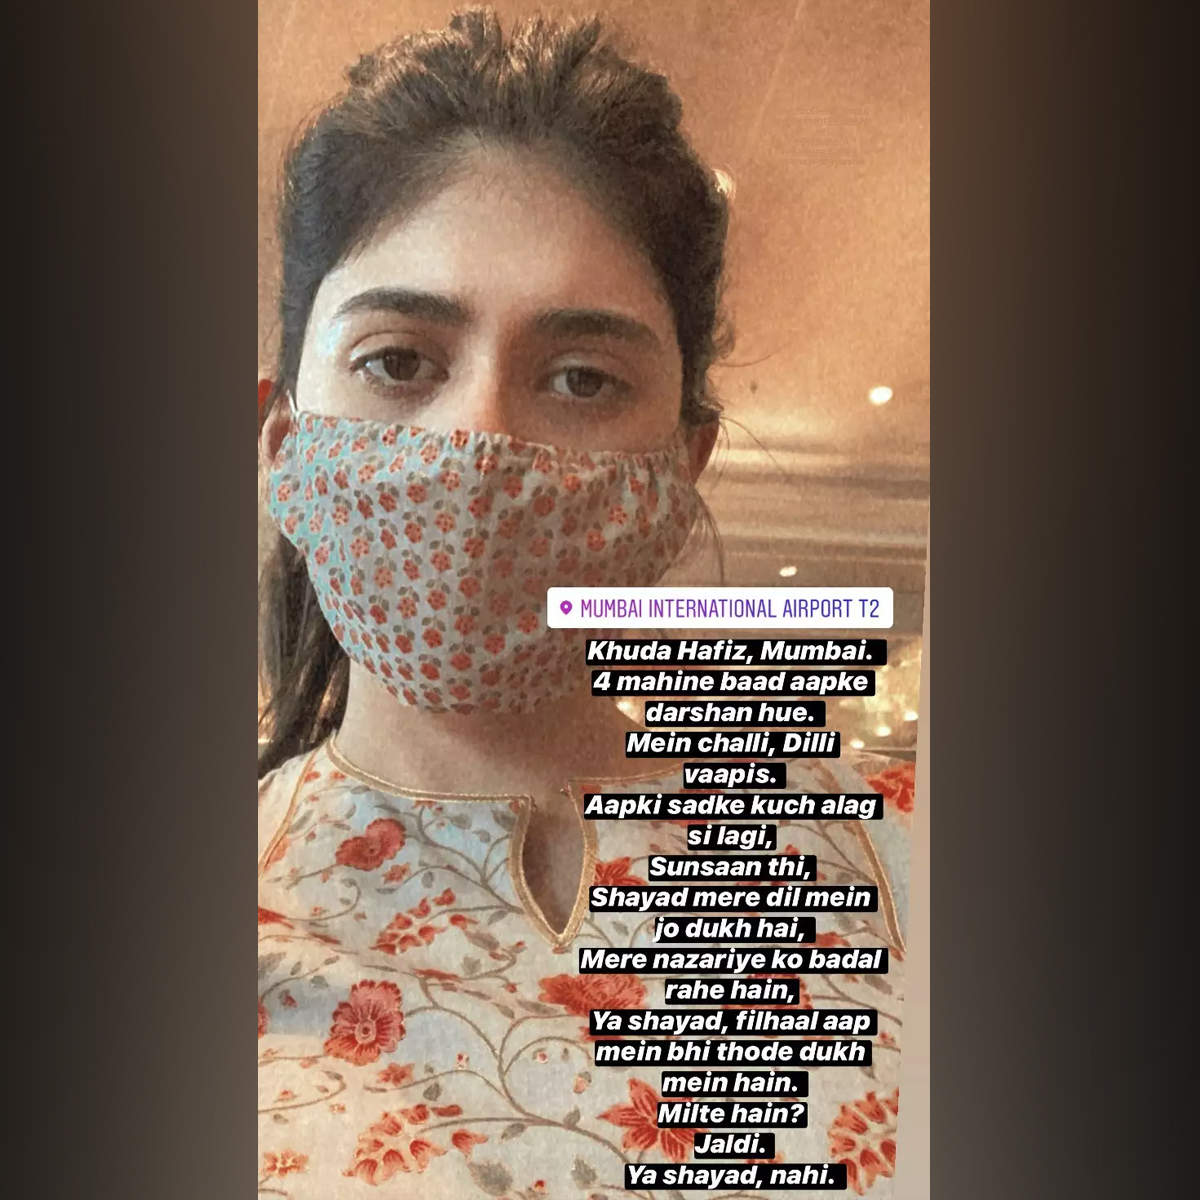 Sushant Singh Rajput’s ‘Dil Bechara’ co-star Sanjana Sanghi gives her statement to Mumbai Police and leaves Mumbai; hinting at never returning 10